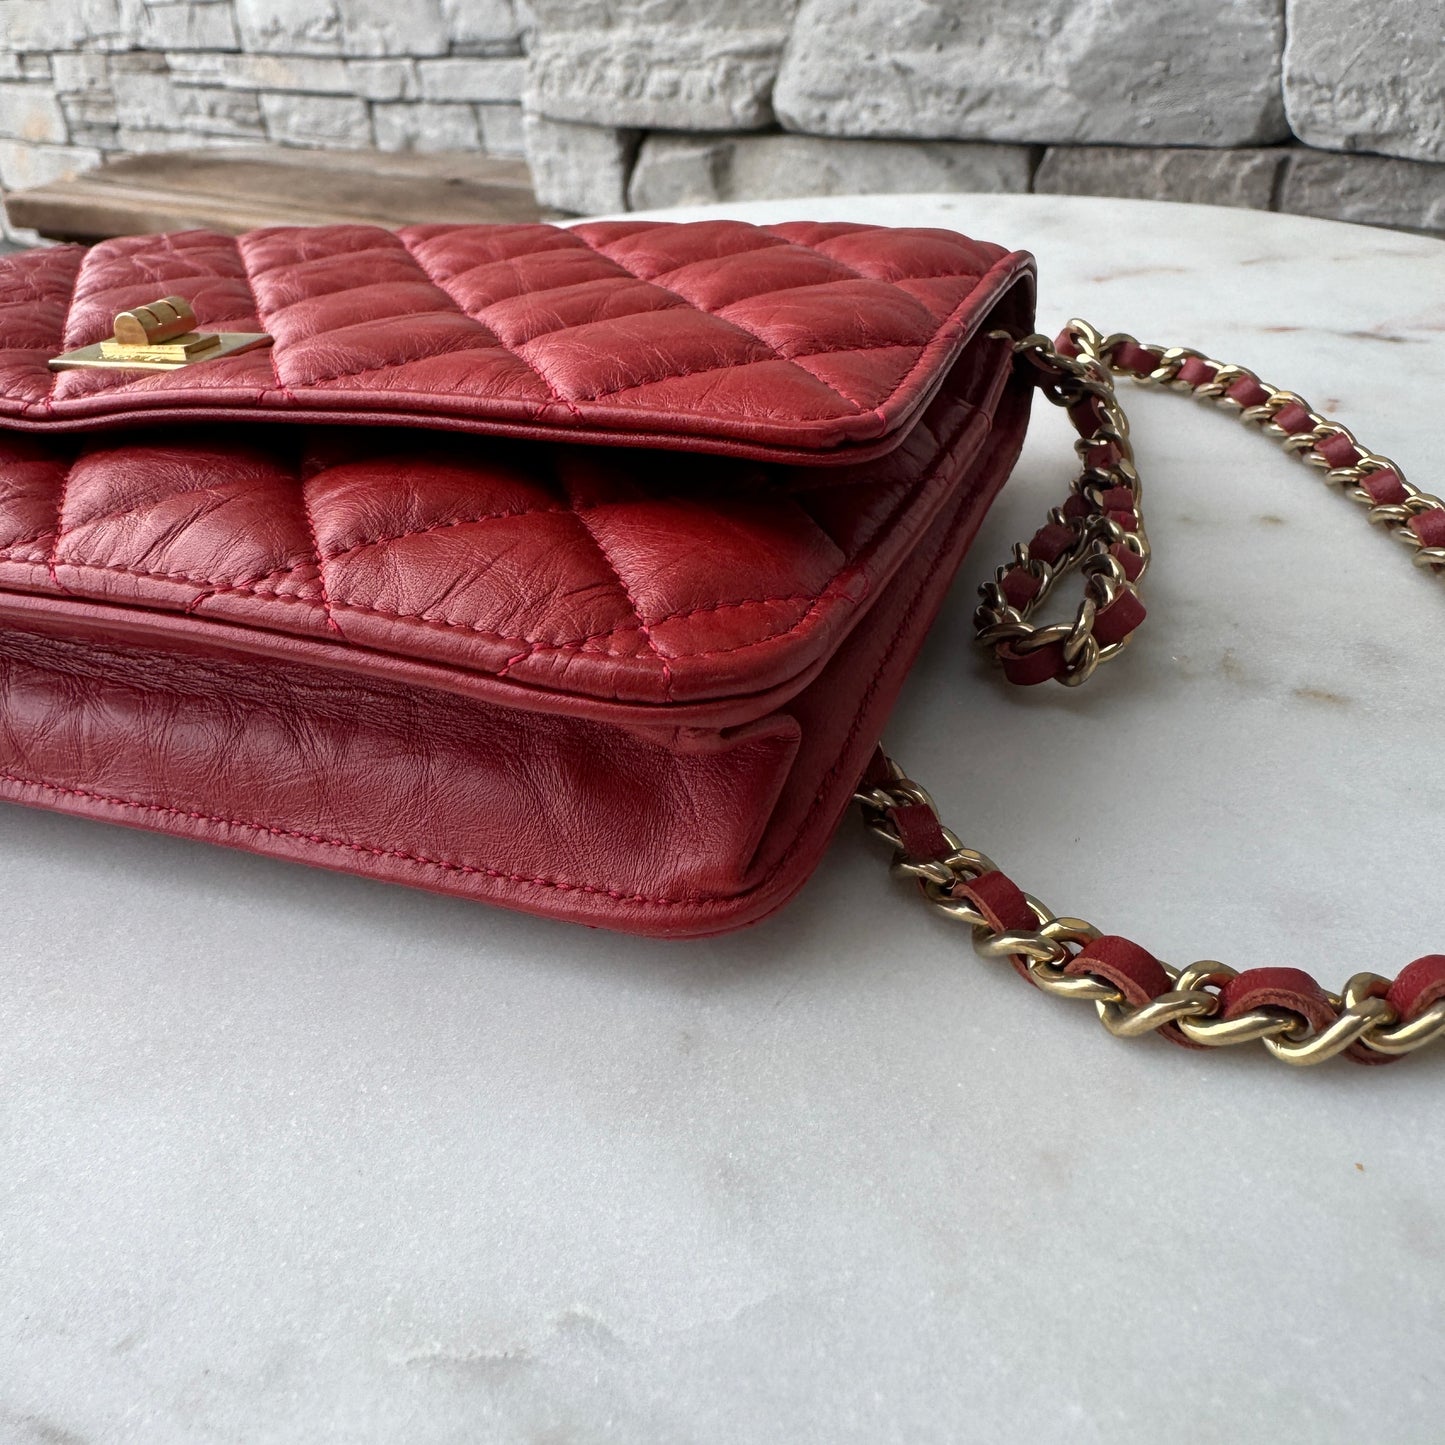 Chanel Reissue Snap Aged Calfskin Wallet on Chain WOC